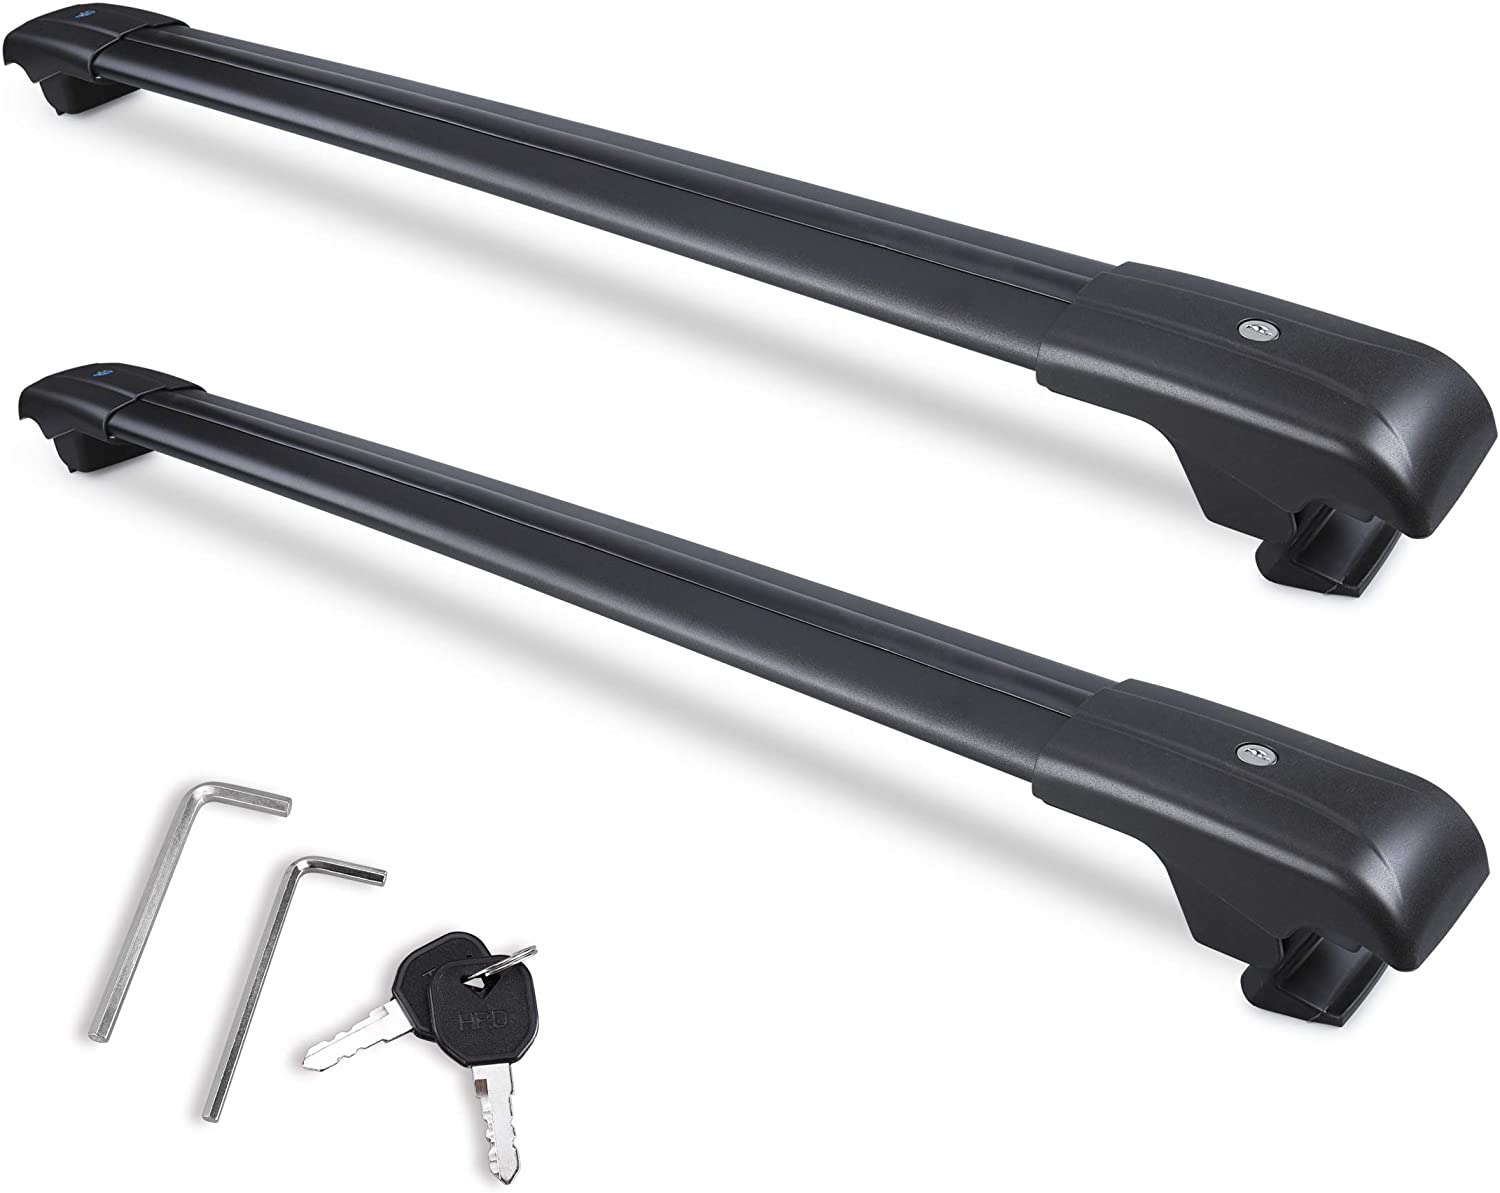 Autekcomma Heavy Duty Roof Rack CrossBars for 2015-2021 Mercedes Benz GLE Series,Anti-Corrosion, Black Matte with Anti-Theft Locks (ONLY FIT Original EXISTING Side Rail)